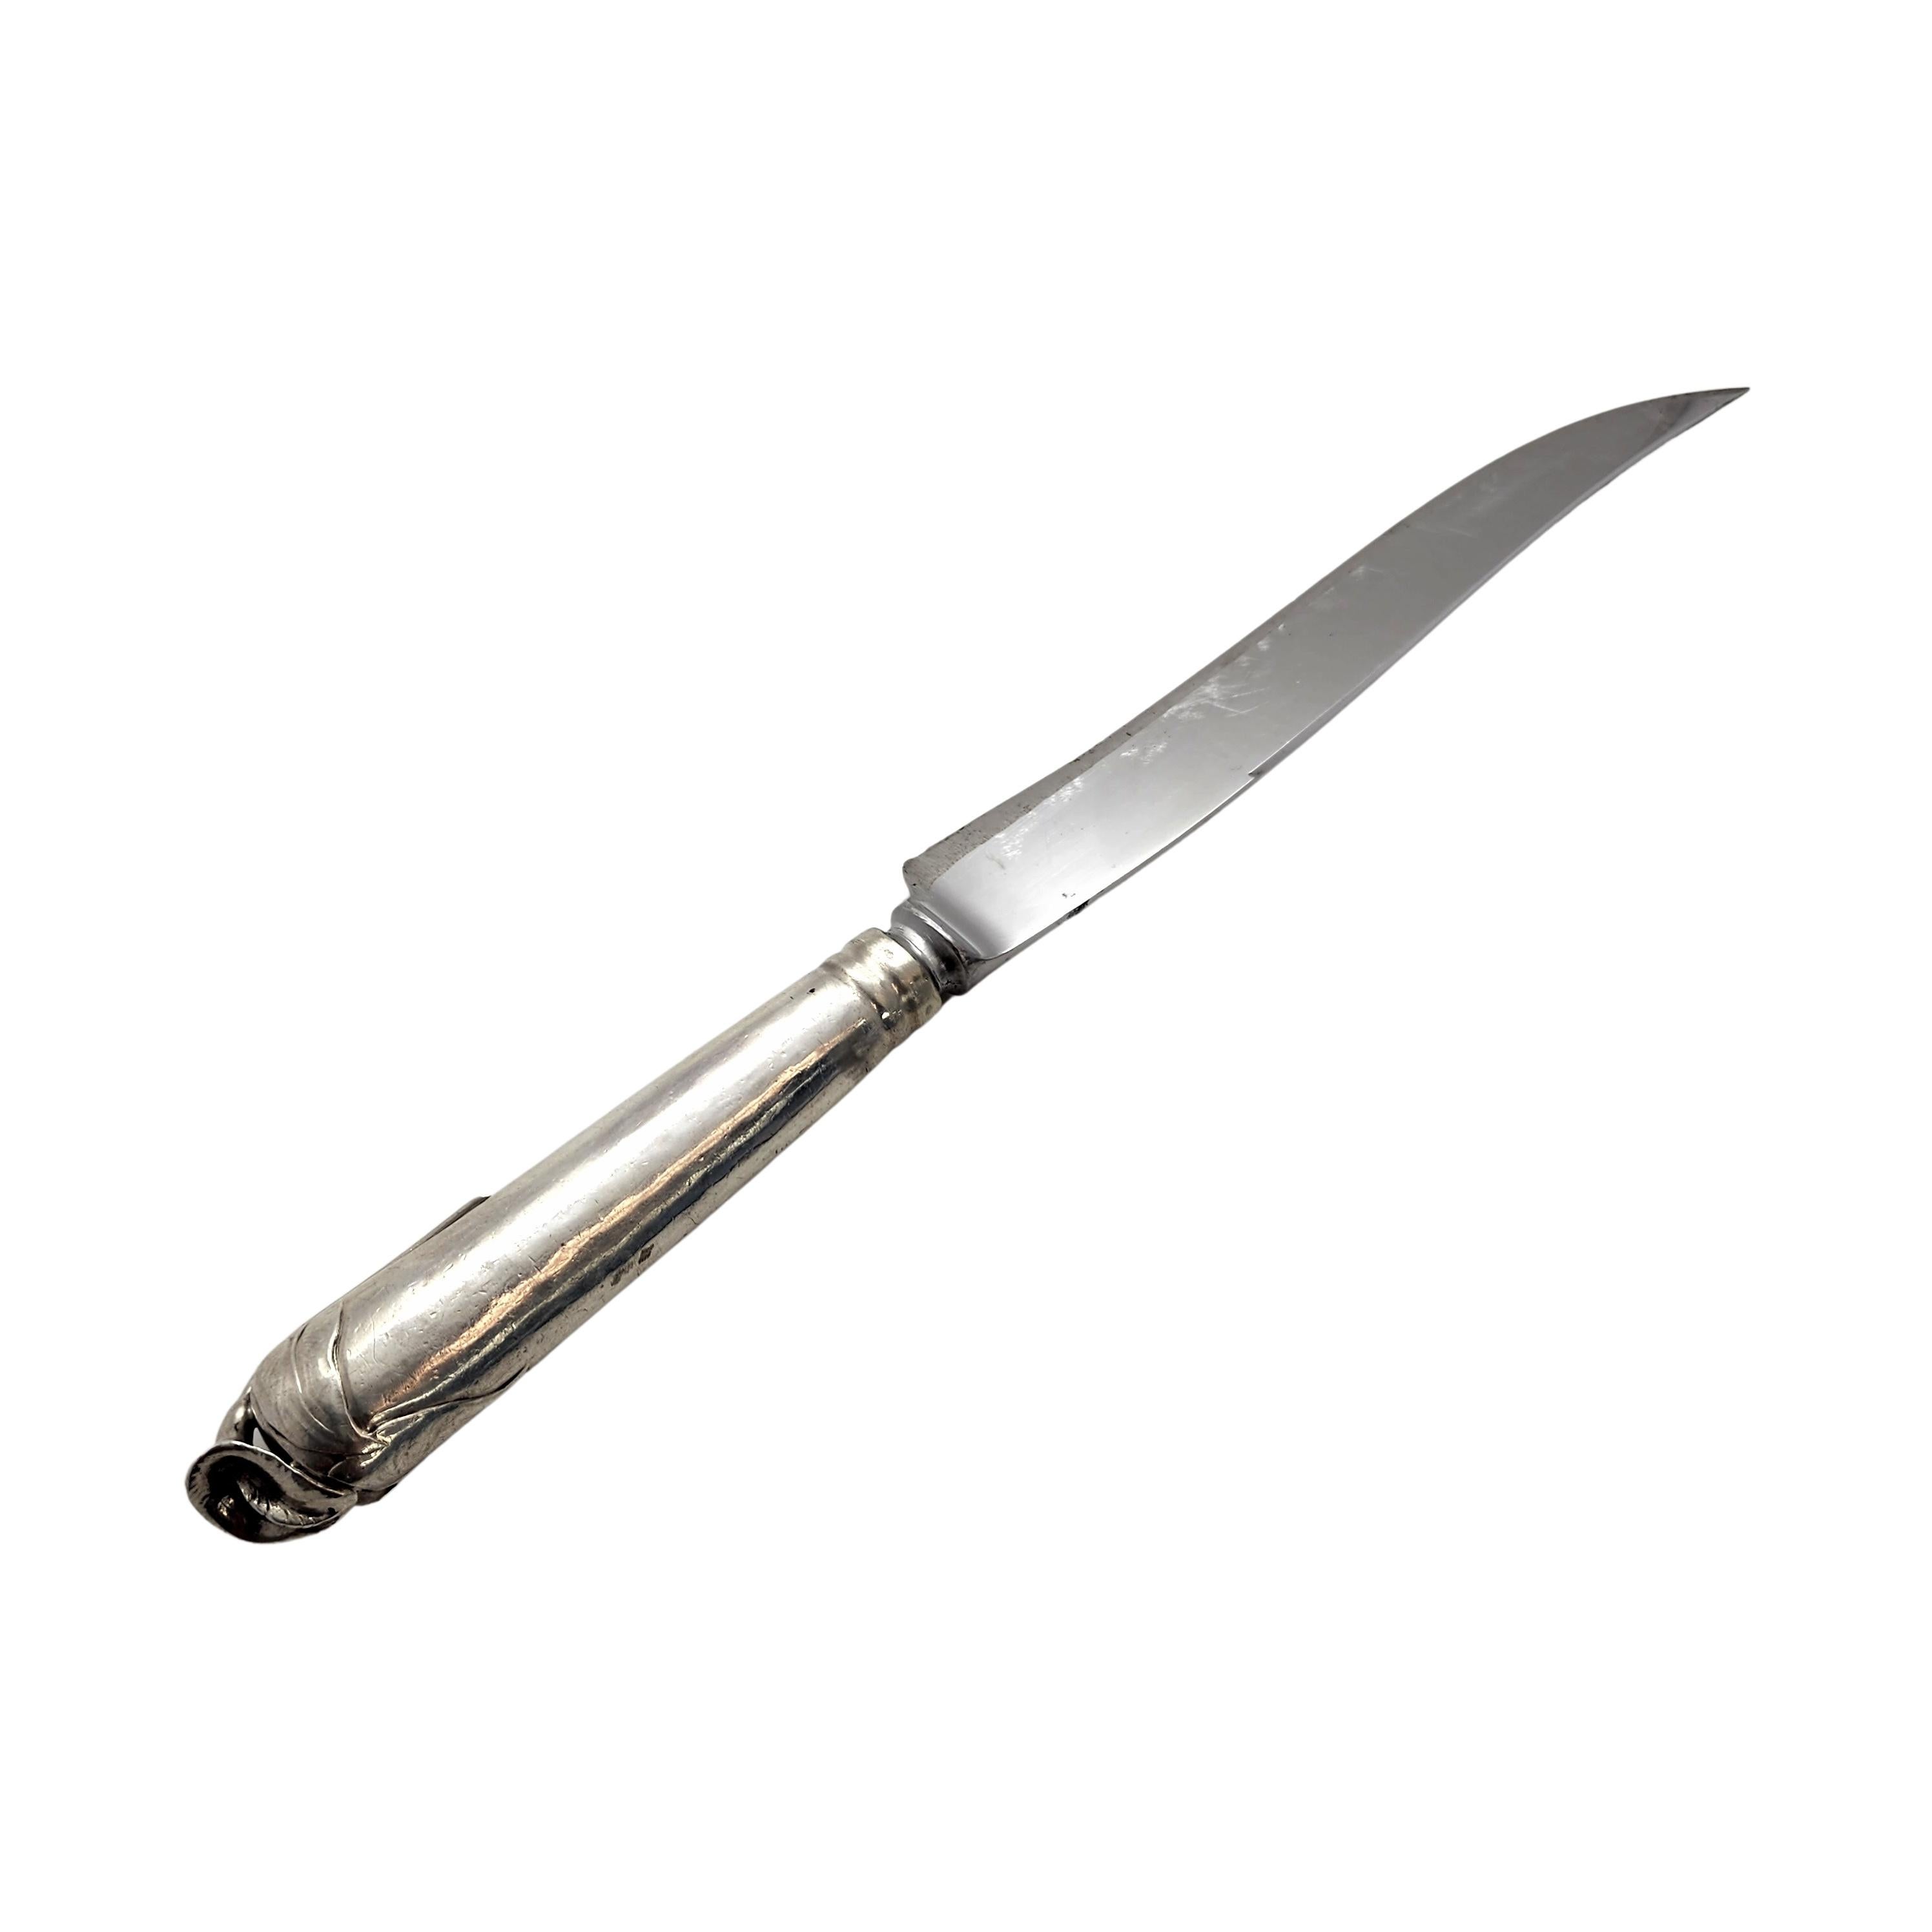 Sterling silver lily handle stainless blade knife by Peer Smed.

Sterling silver tapering handle with applied lily and chased leaf at top. Sharp pointed stainless steel blade.

Measures approx 13 1/2